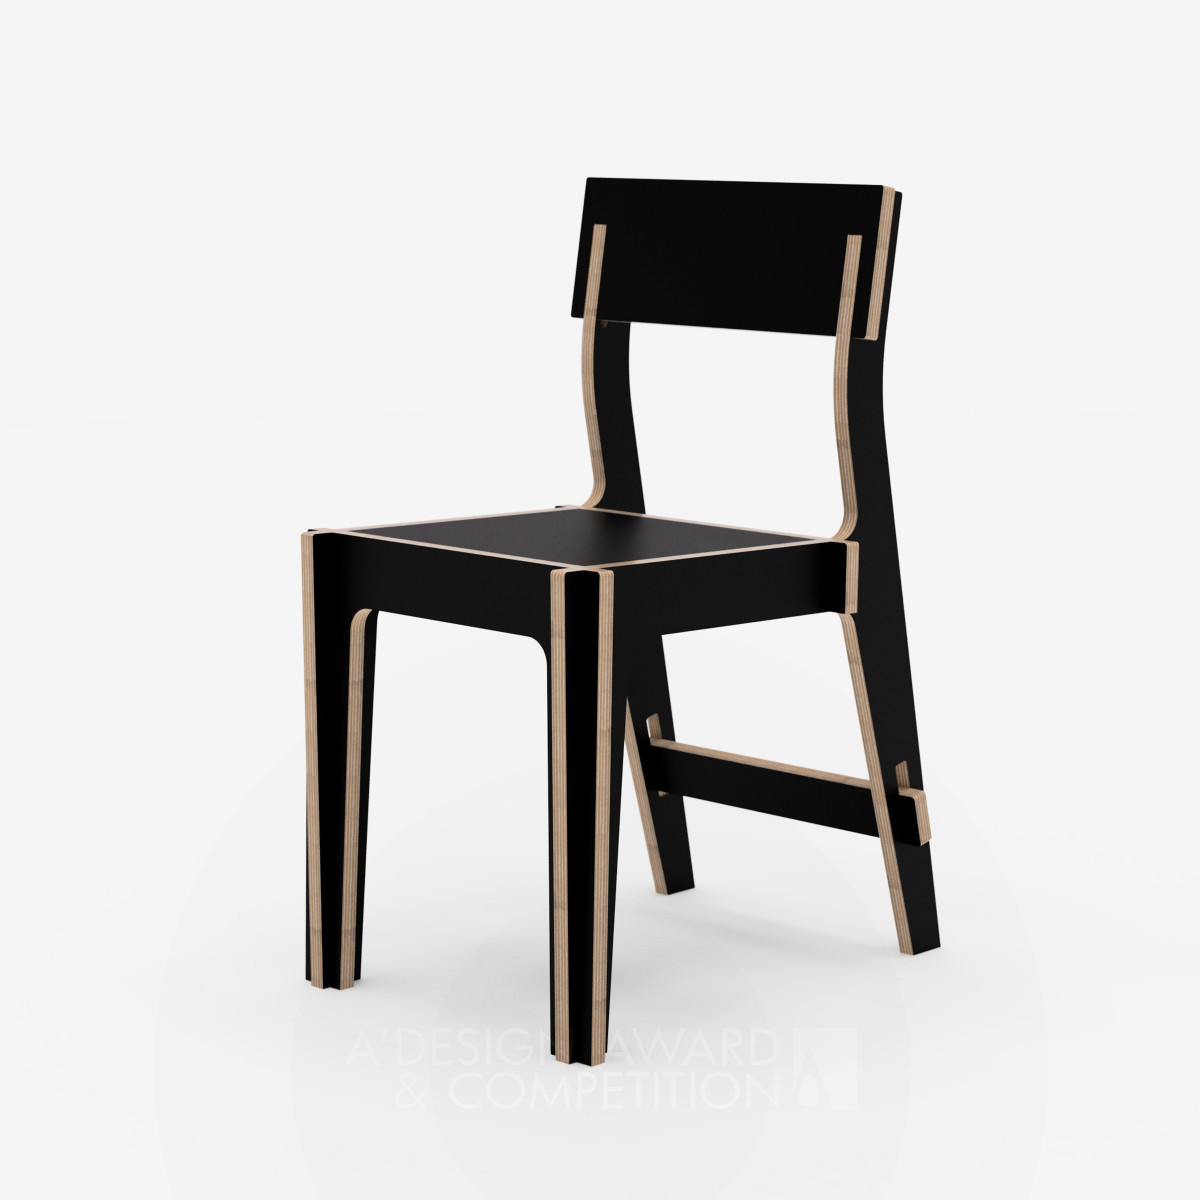 Ida: A Sustainable DIY Chair for the Modern Home